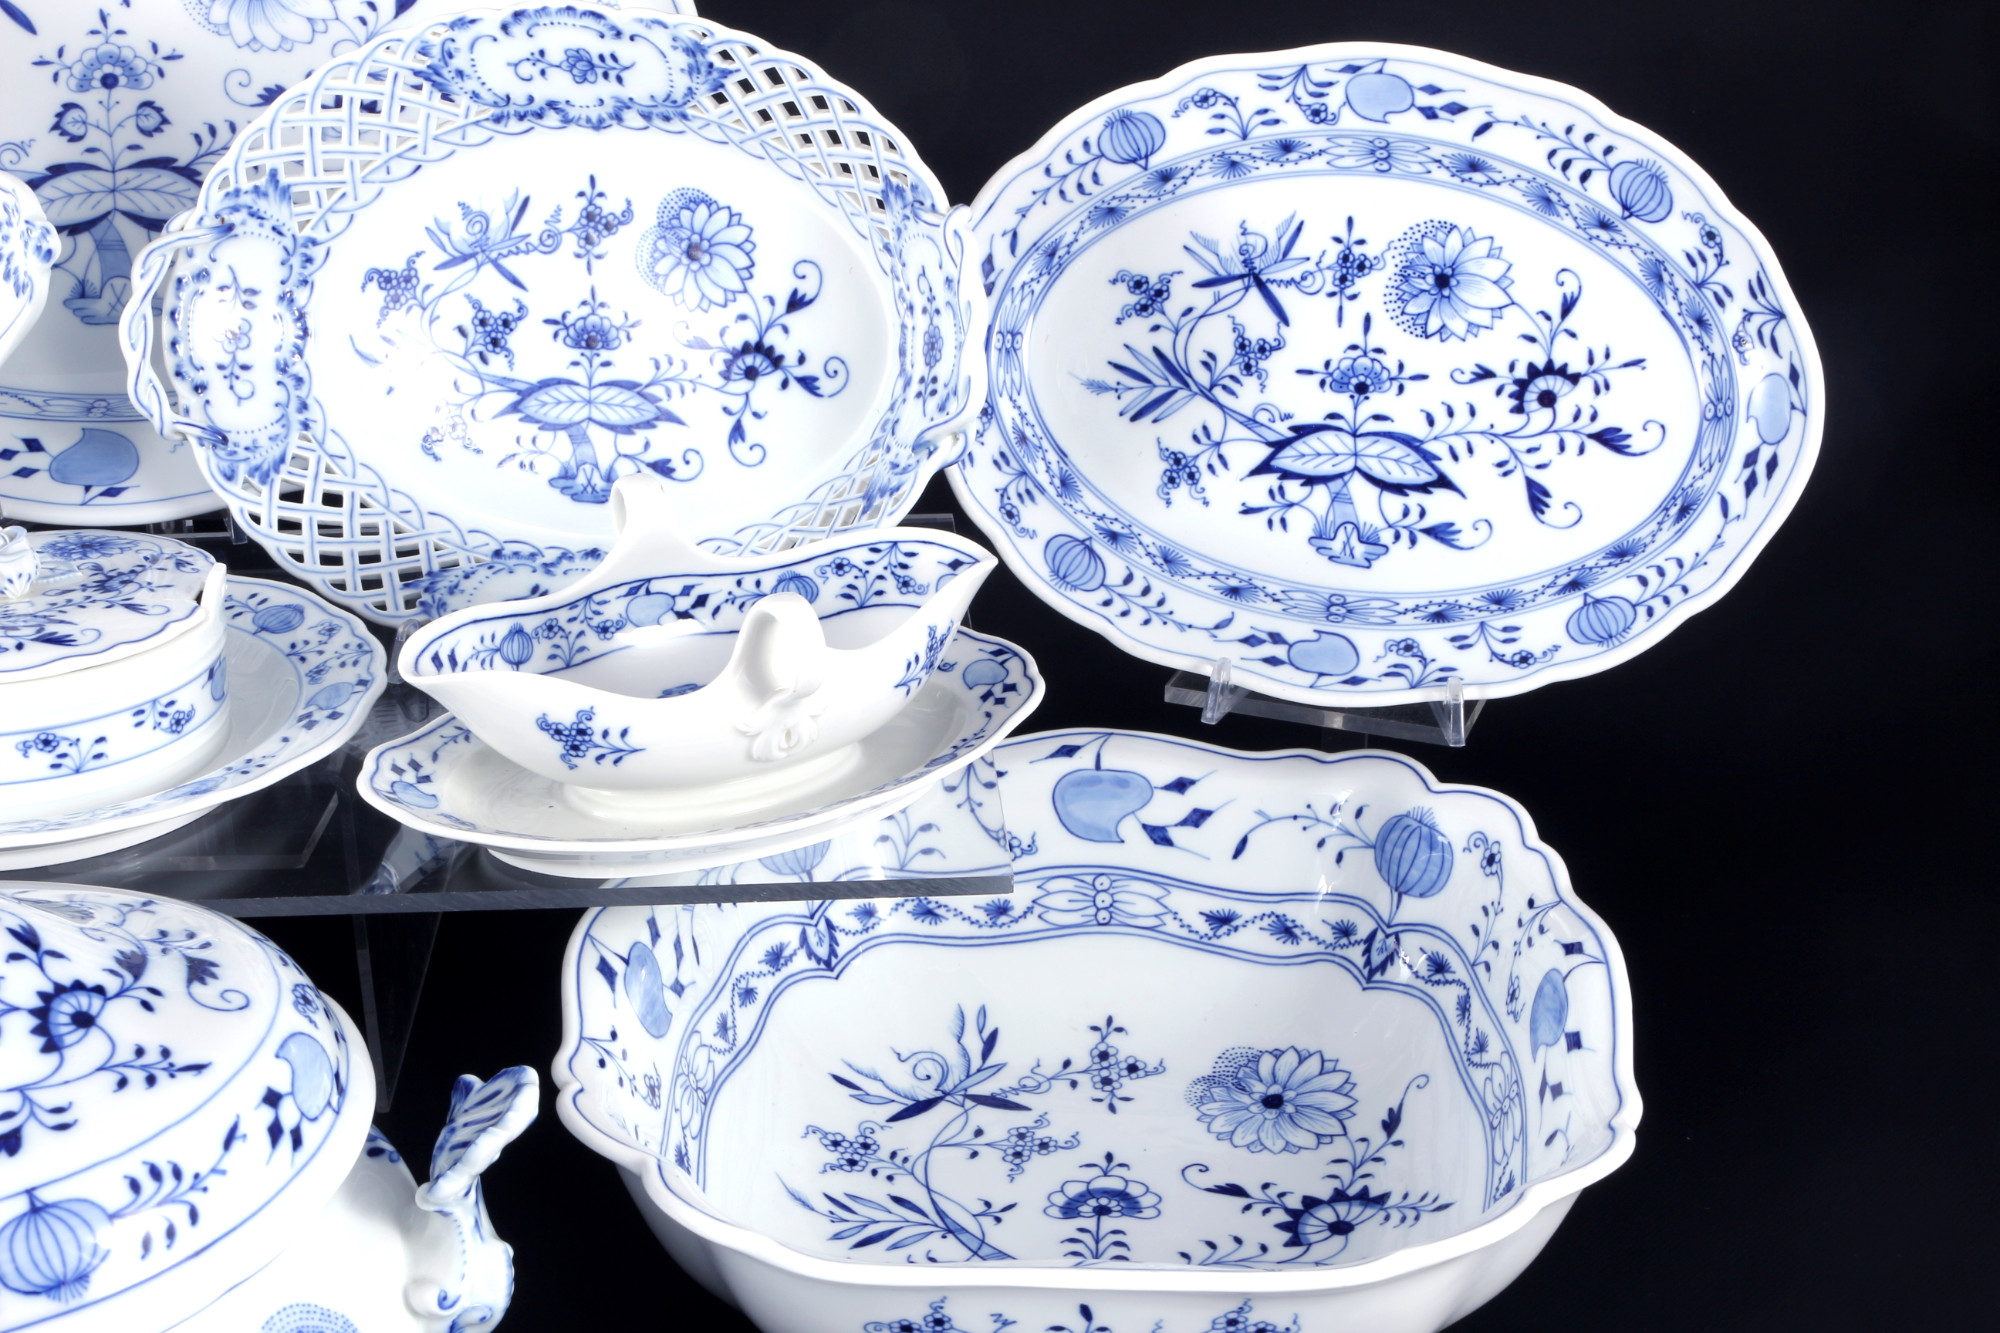 Meissen Onion Pattern dinner service for 6 persons 1st choice, Speiseservice 1.Wahl, - Image 4 of 8